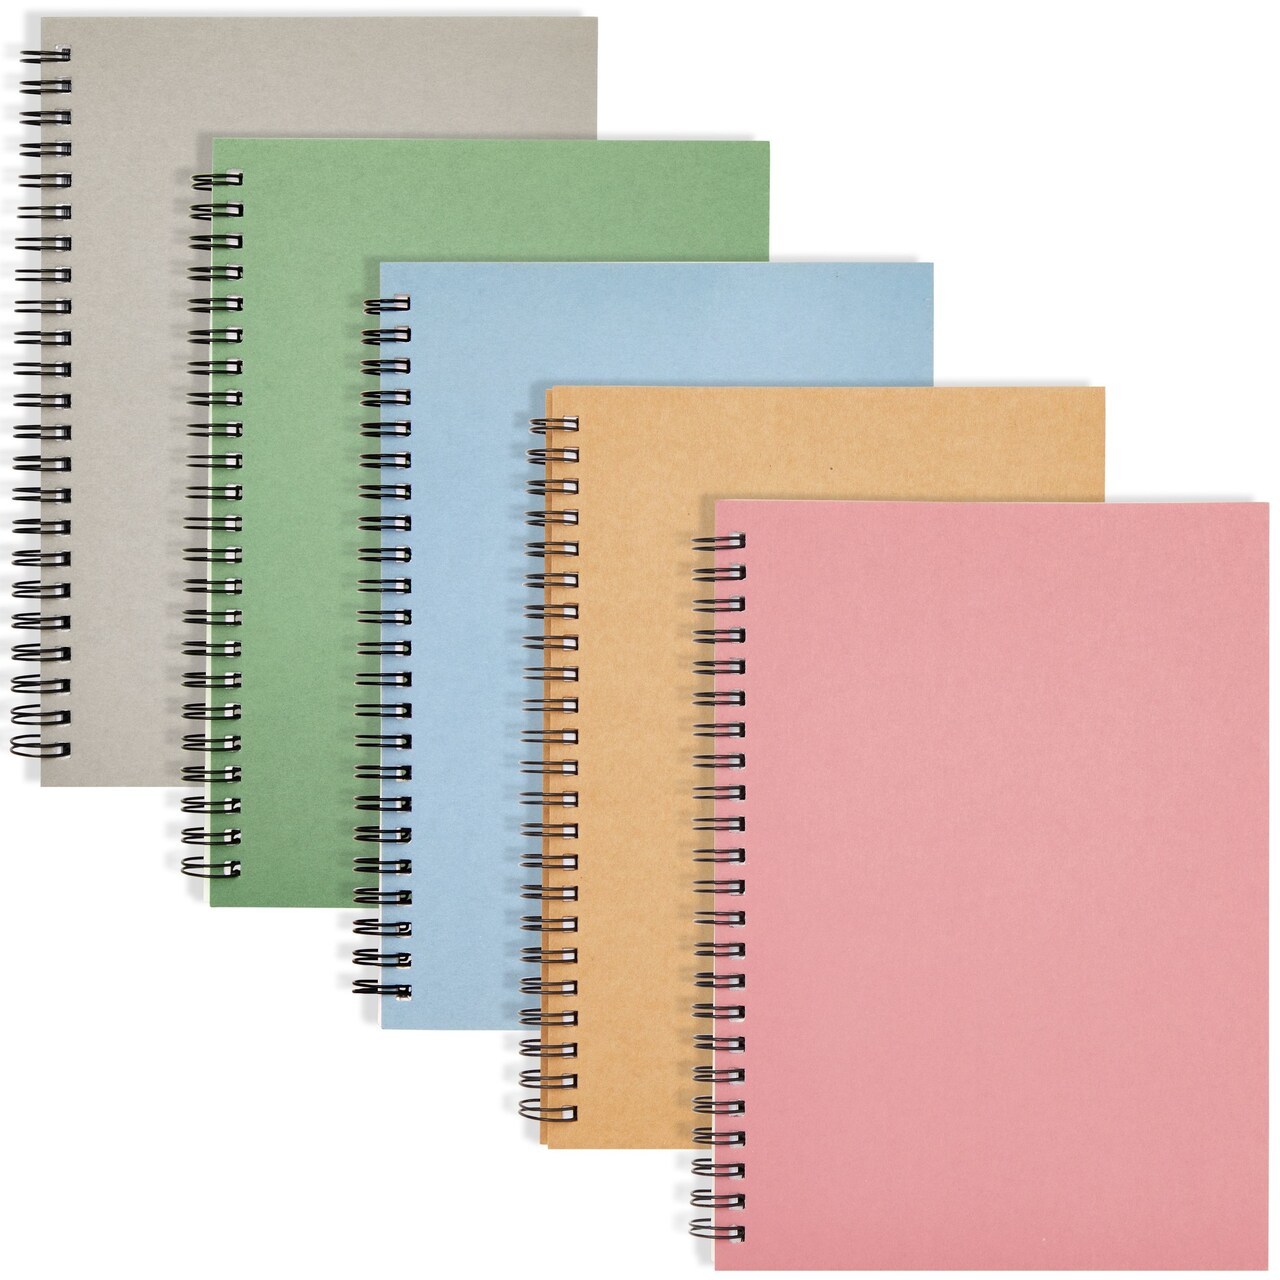 5 Pack Spiral Bound Journal, Bulk, 6x8 Notebook with 120 Lined Pages for Students, Work, 5 Colors (Kraft Paper Covers)